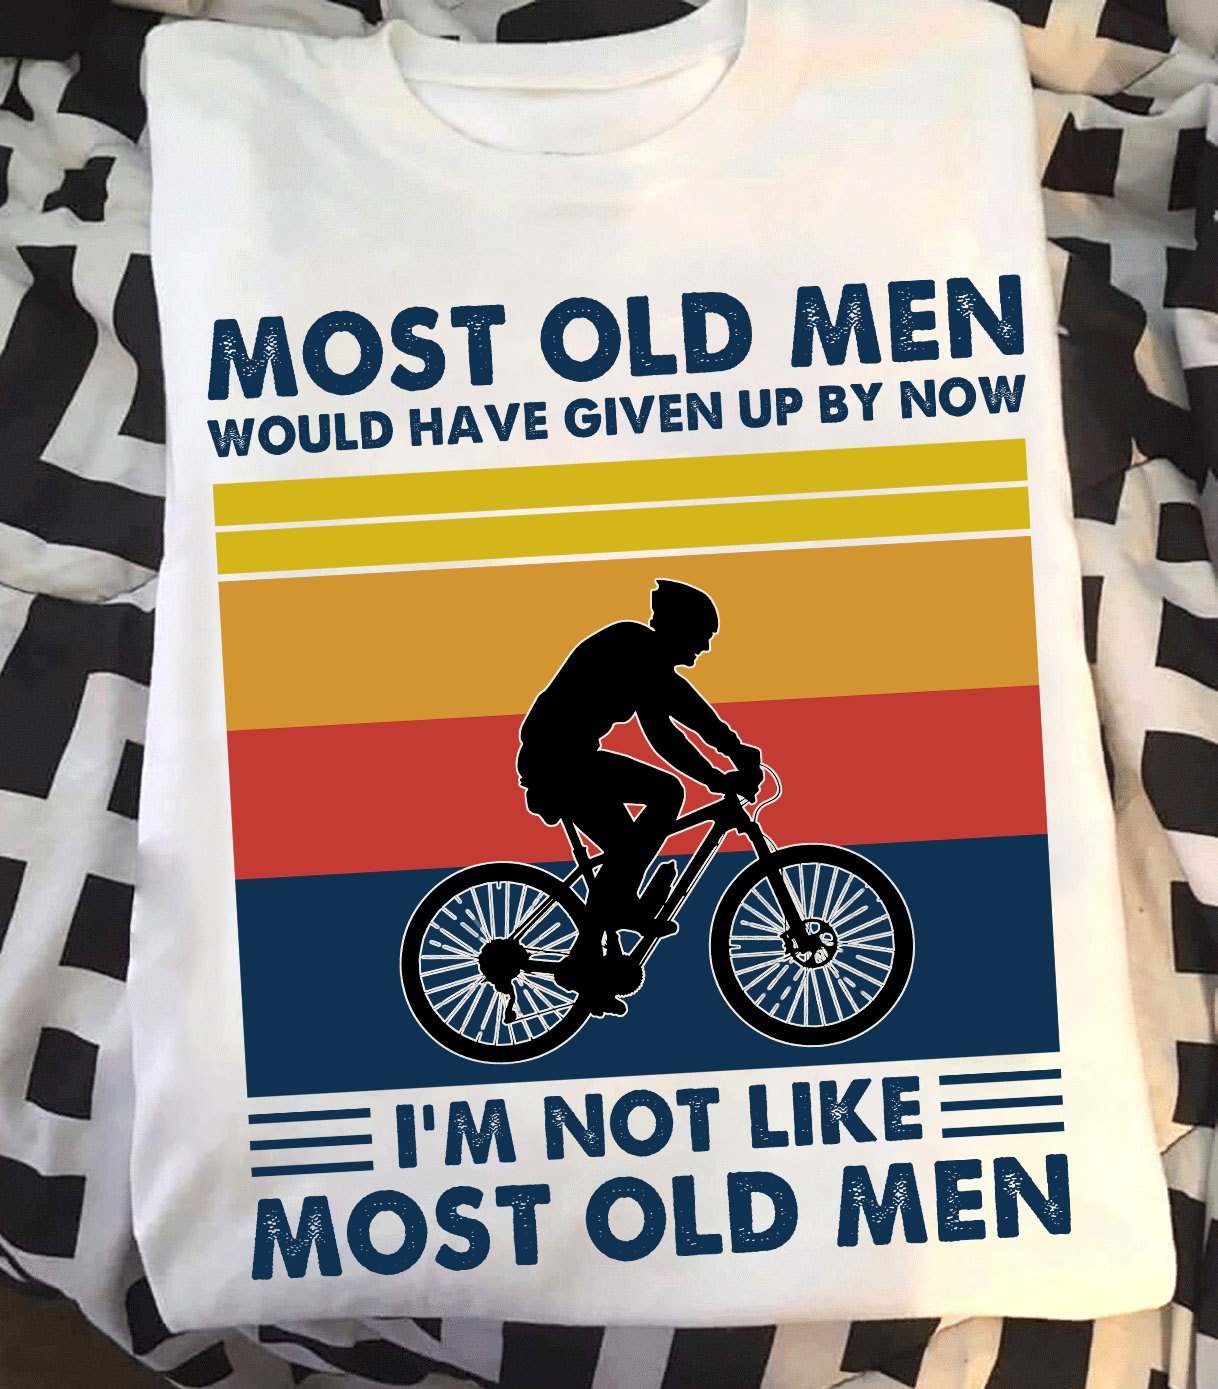 Man Riding Bicycle - Most old men would have given up by now i'm not like most old men